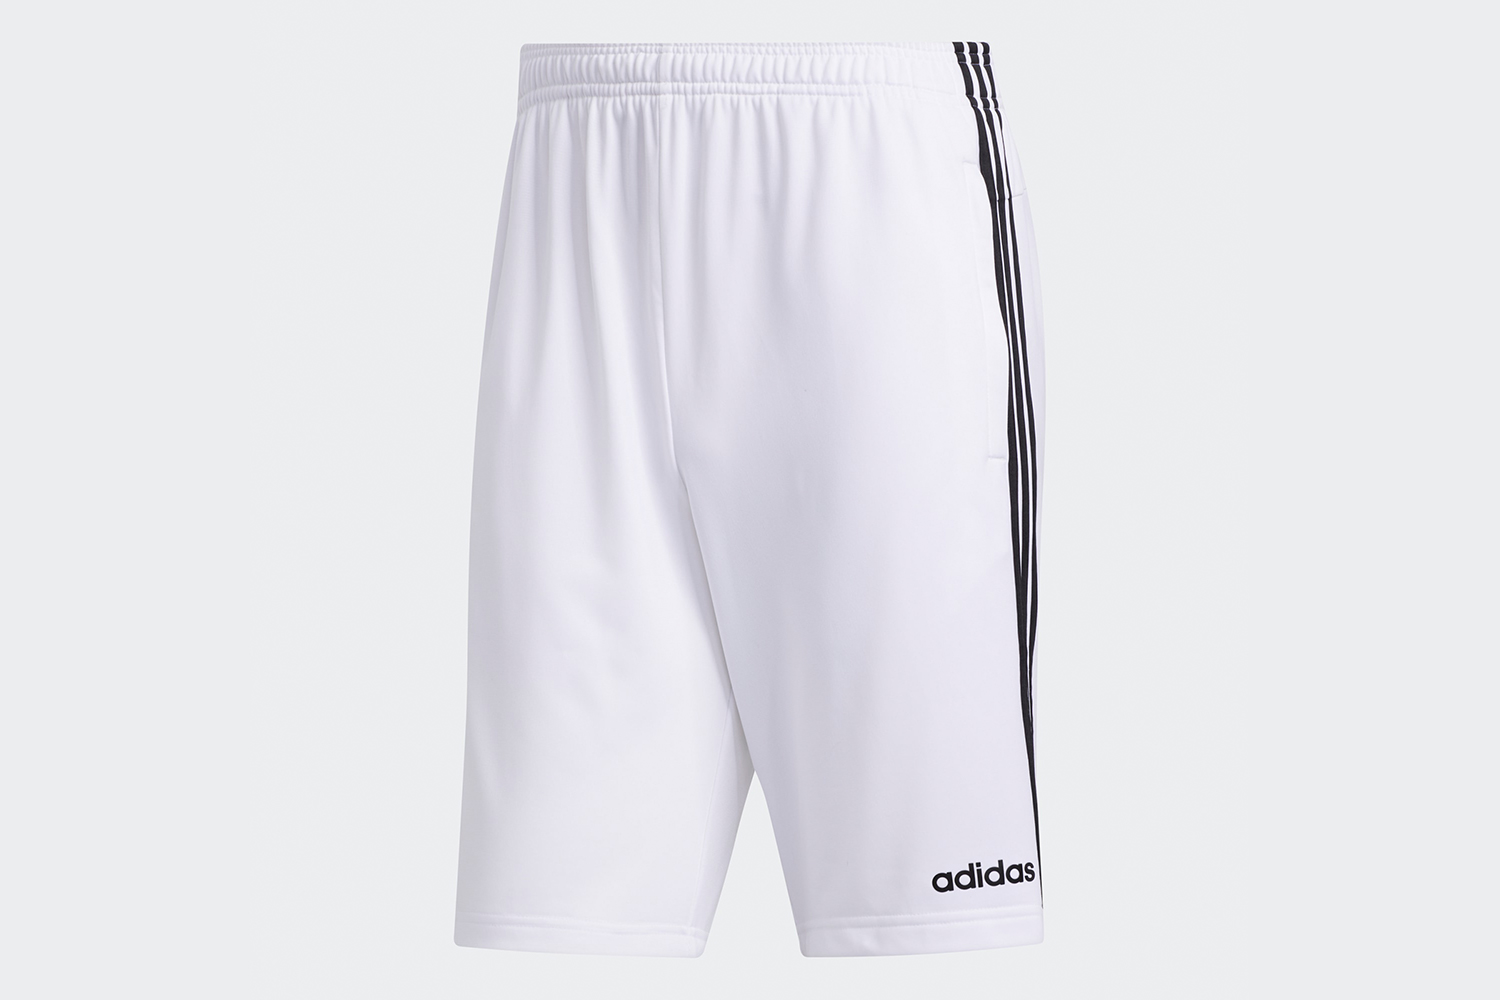 Adidas workout shorts in white with the three-stripe design